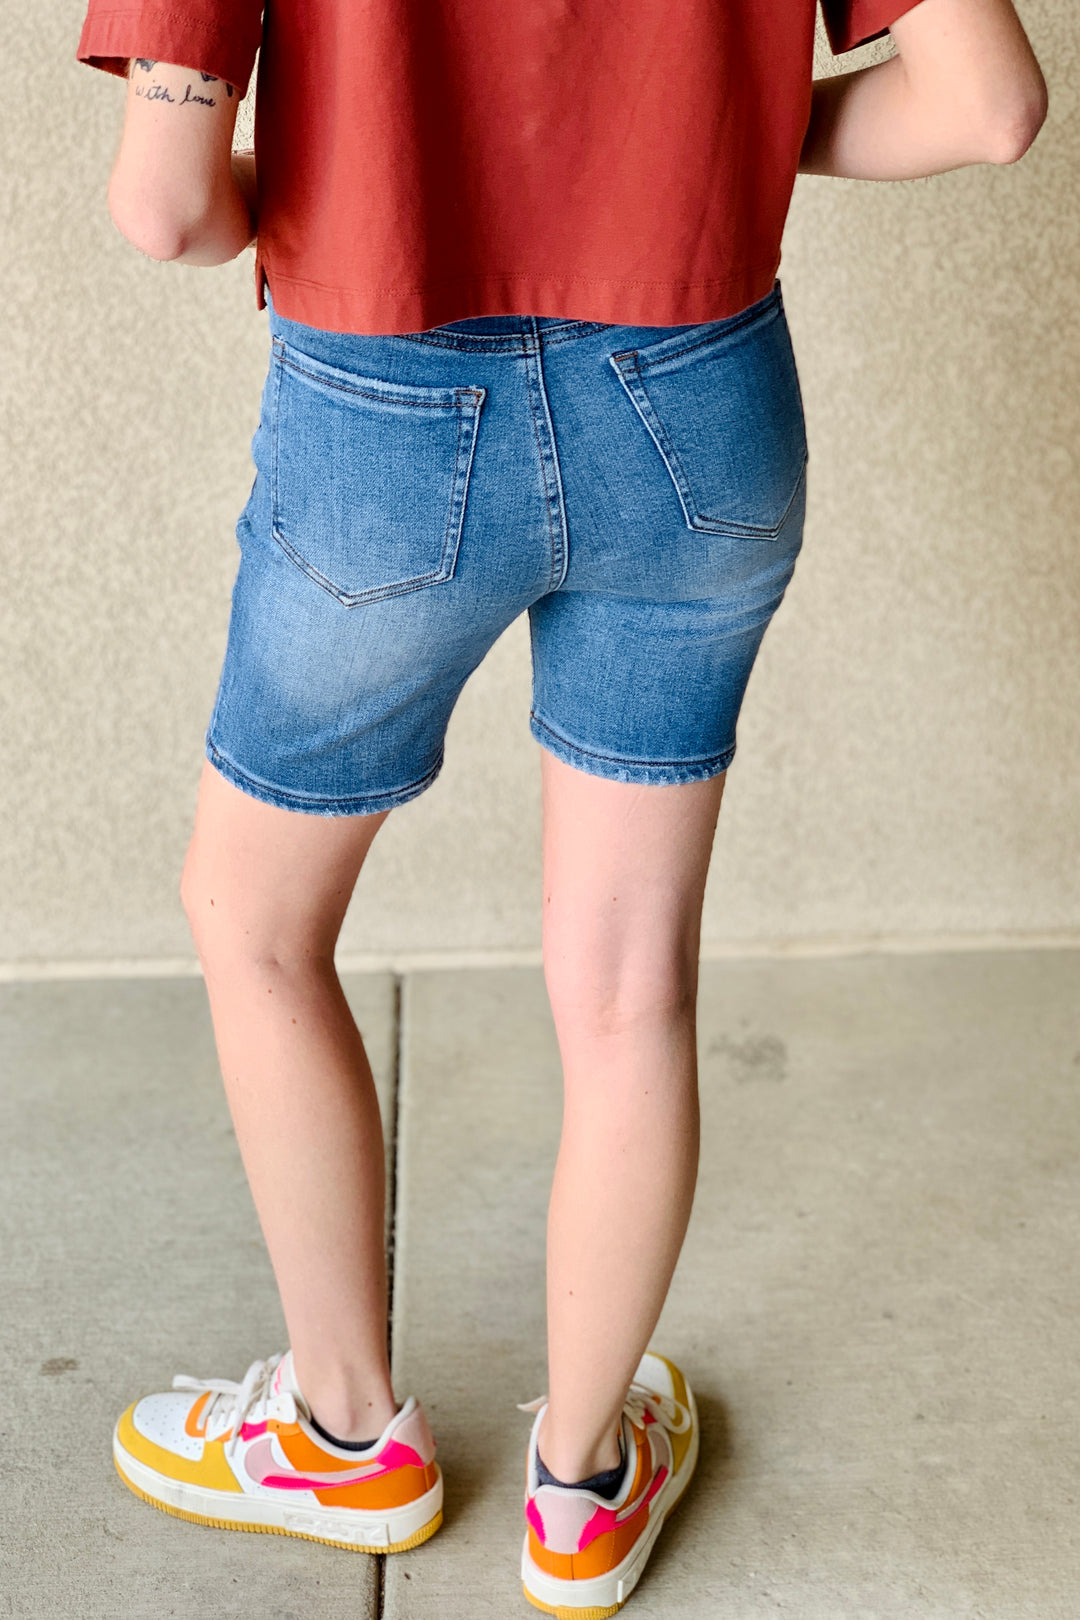 Bess Button Fly Mid-Thigh Shorts